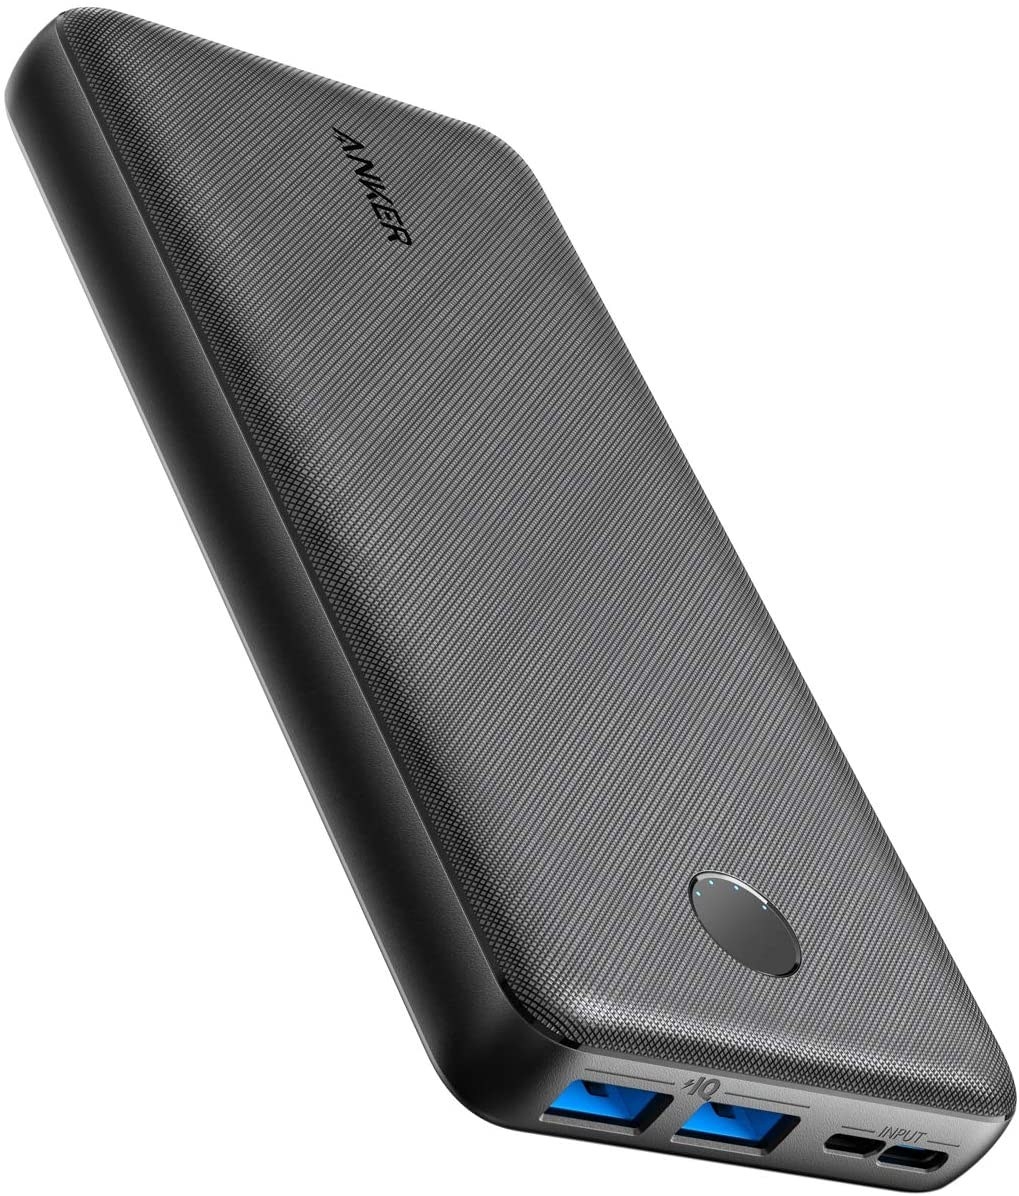 A close-up of a black Anker portable charger with two USB ports